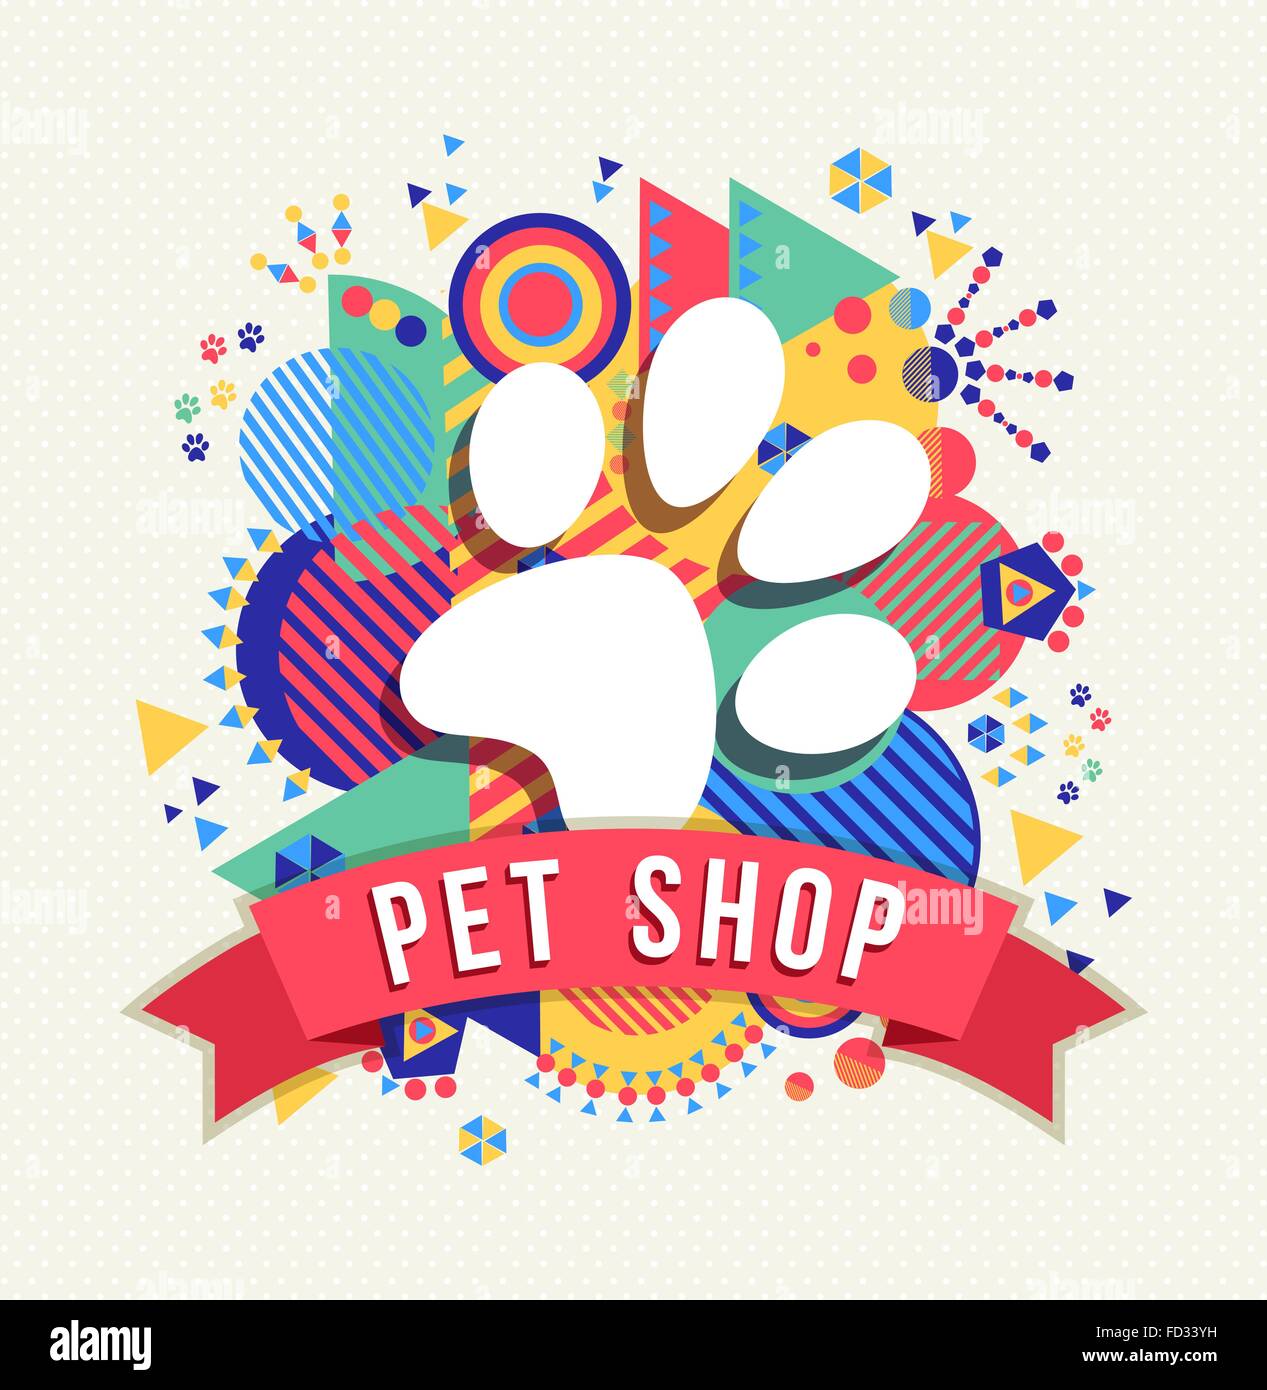 Pet shop logo, dog paw icon concept design with text label and colorful geometry shape background. EPS10 vector. Stock Vector